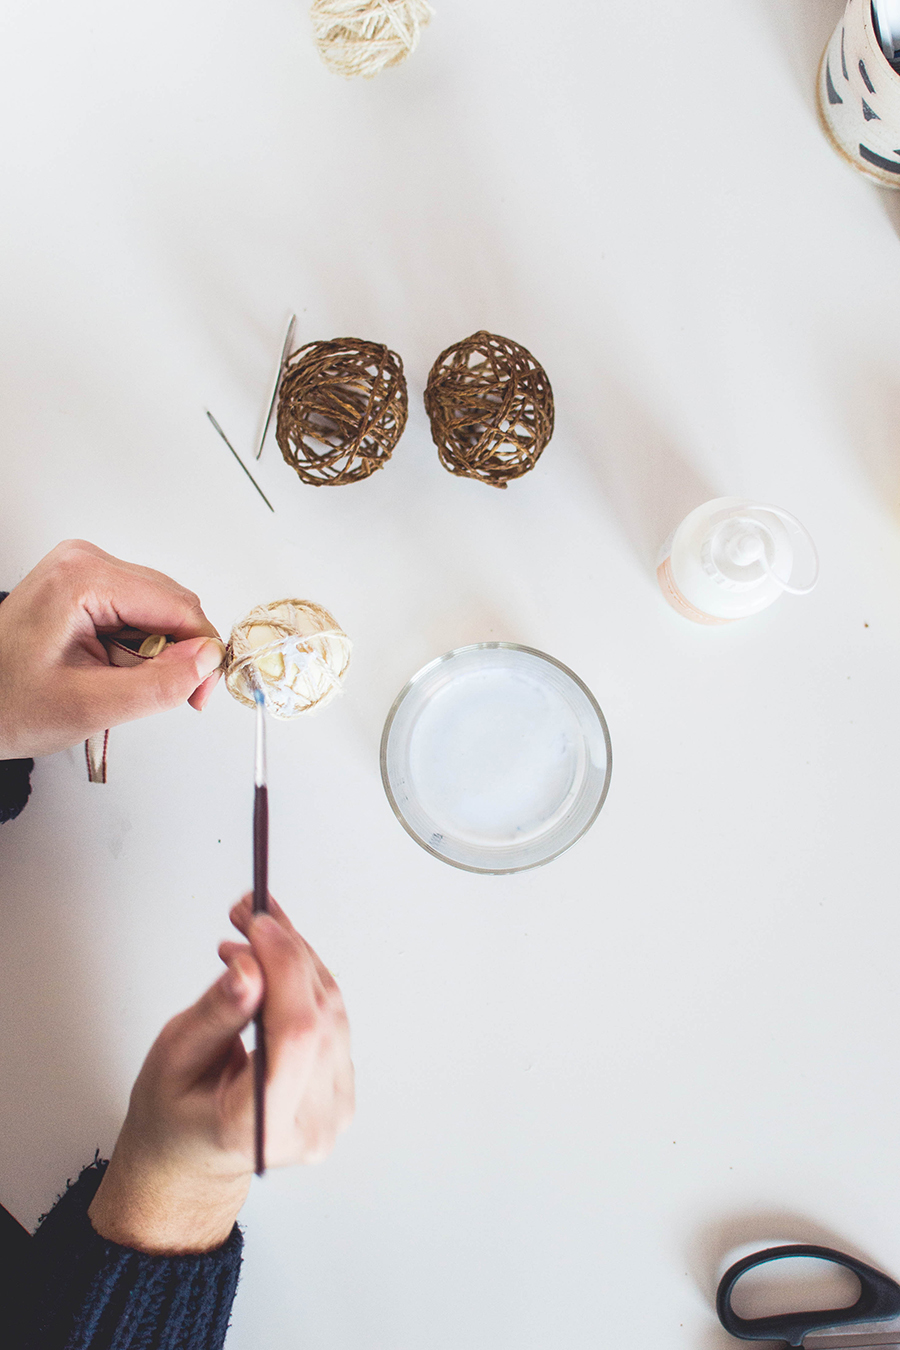 Make a twine sphere for your DIY winter scented garland